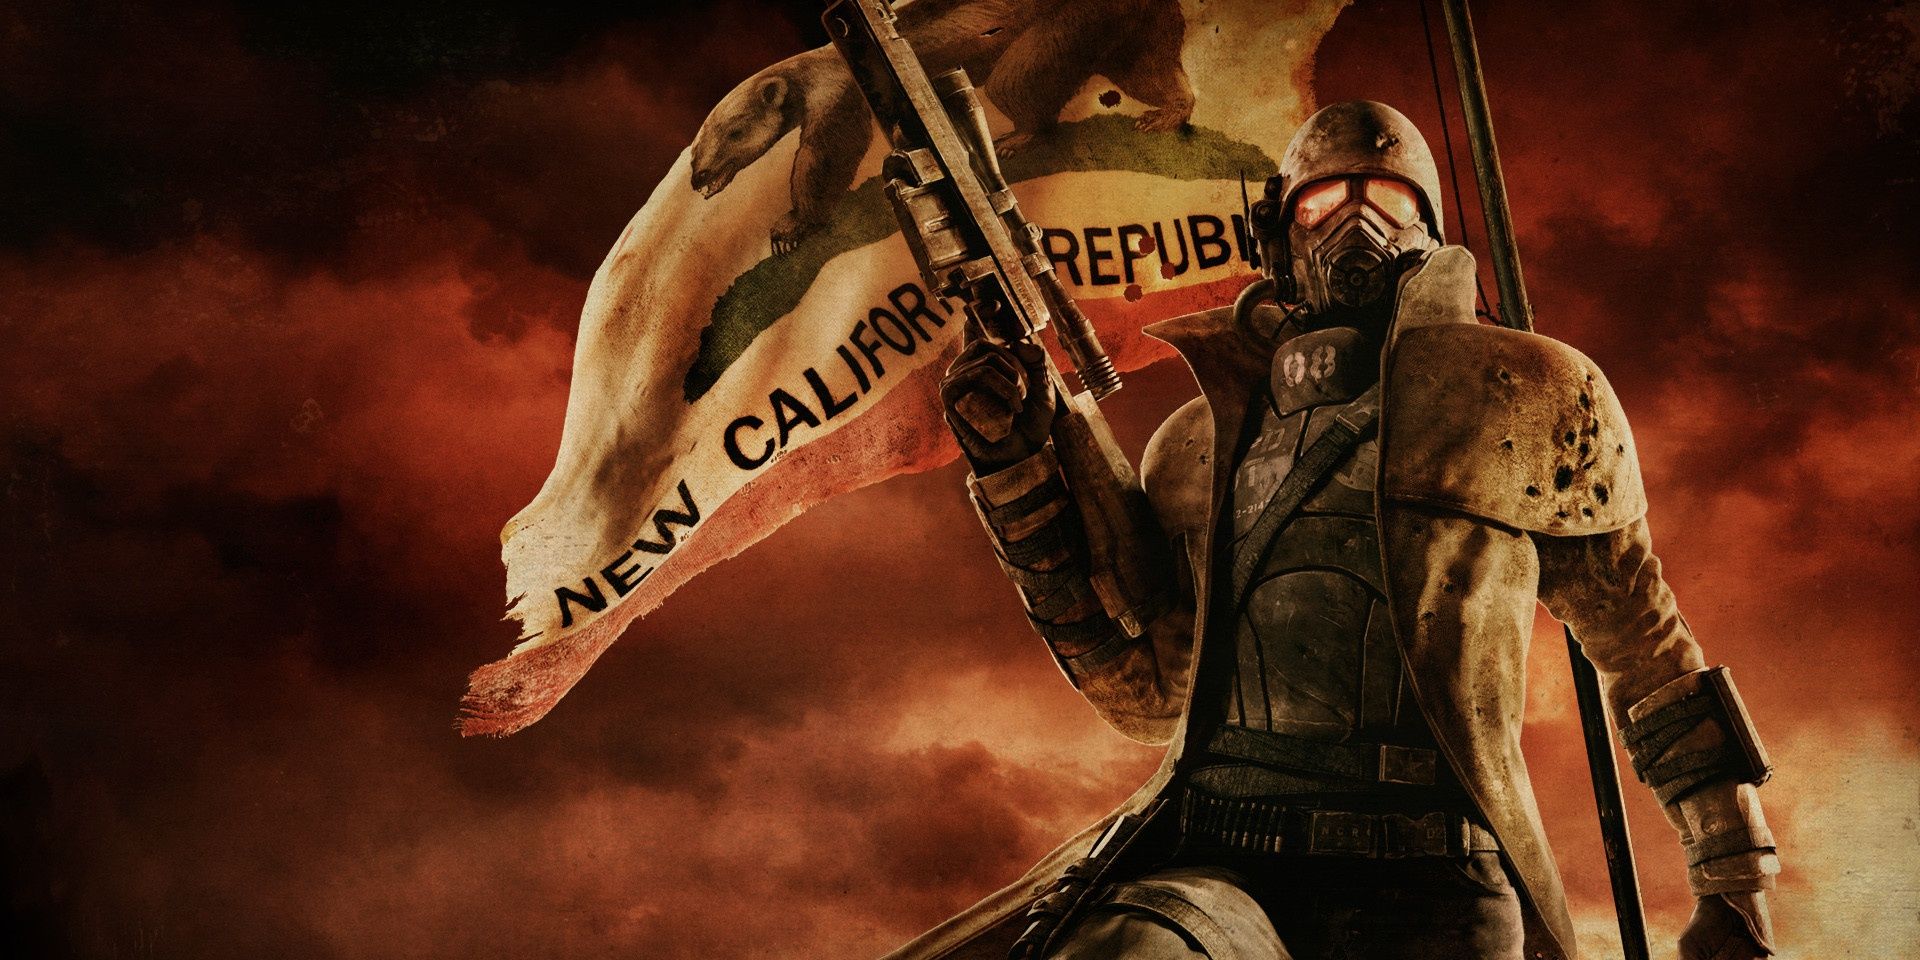 A figure in Ranger uniform holding a gun in front of an NCR flag